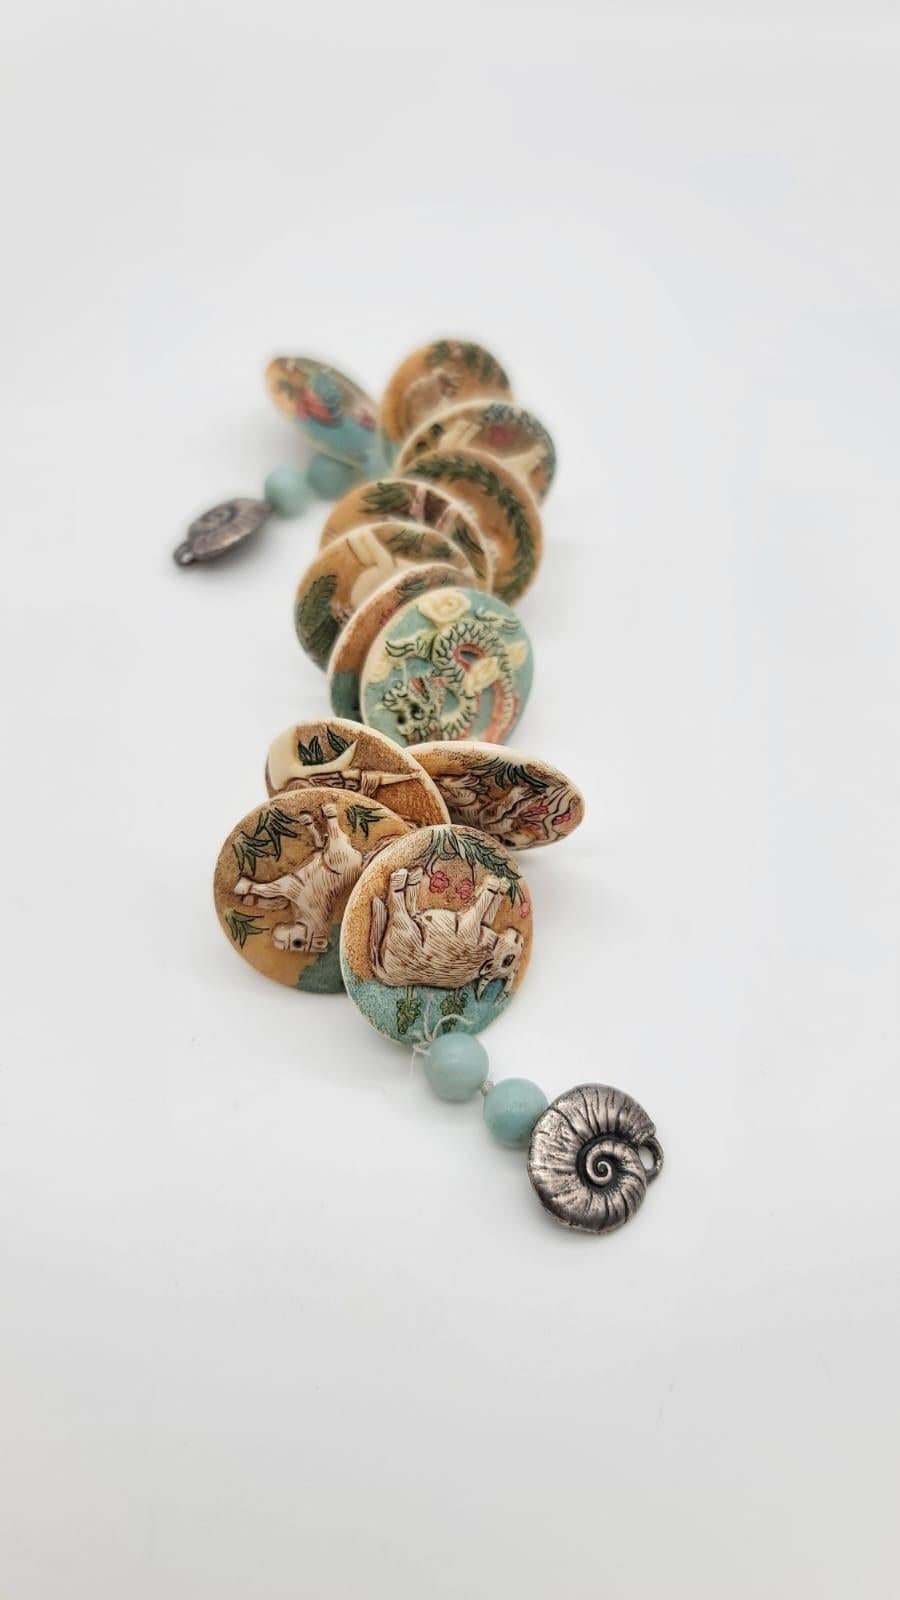 Women's A.Jeschel Bracelet hand-painted Chinese zodiac carved bone, Amazonite beads For Sale